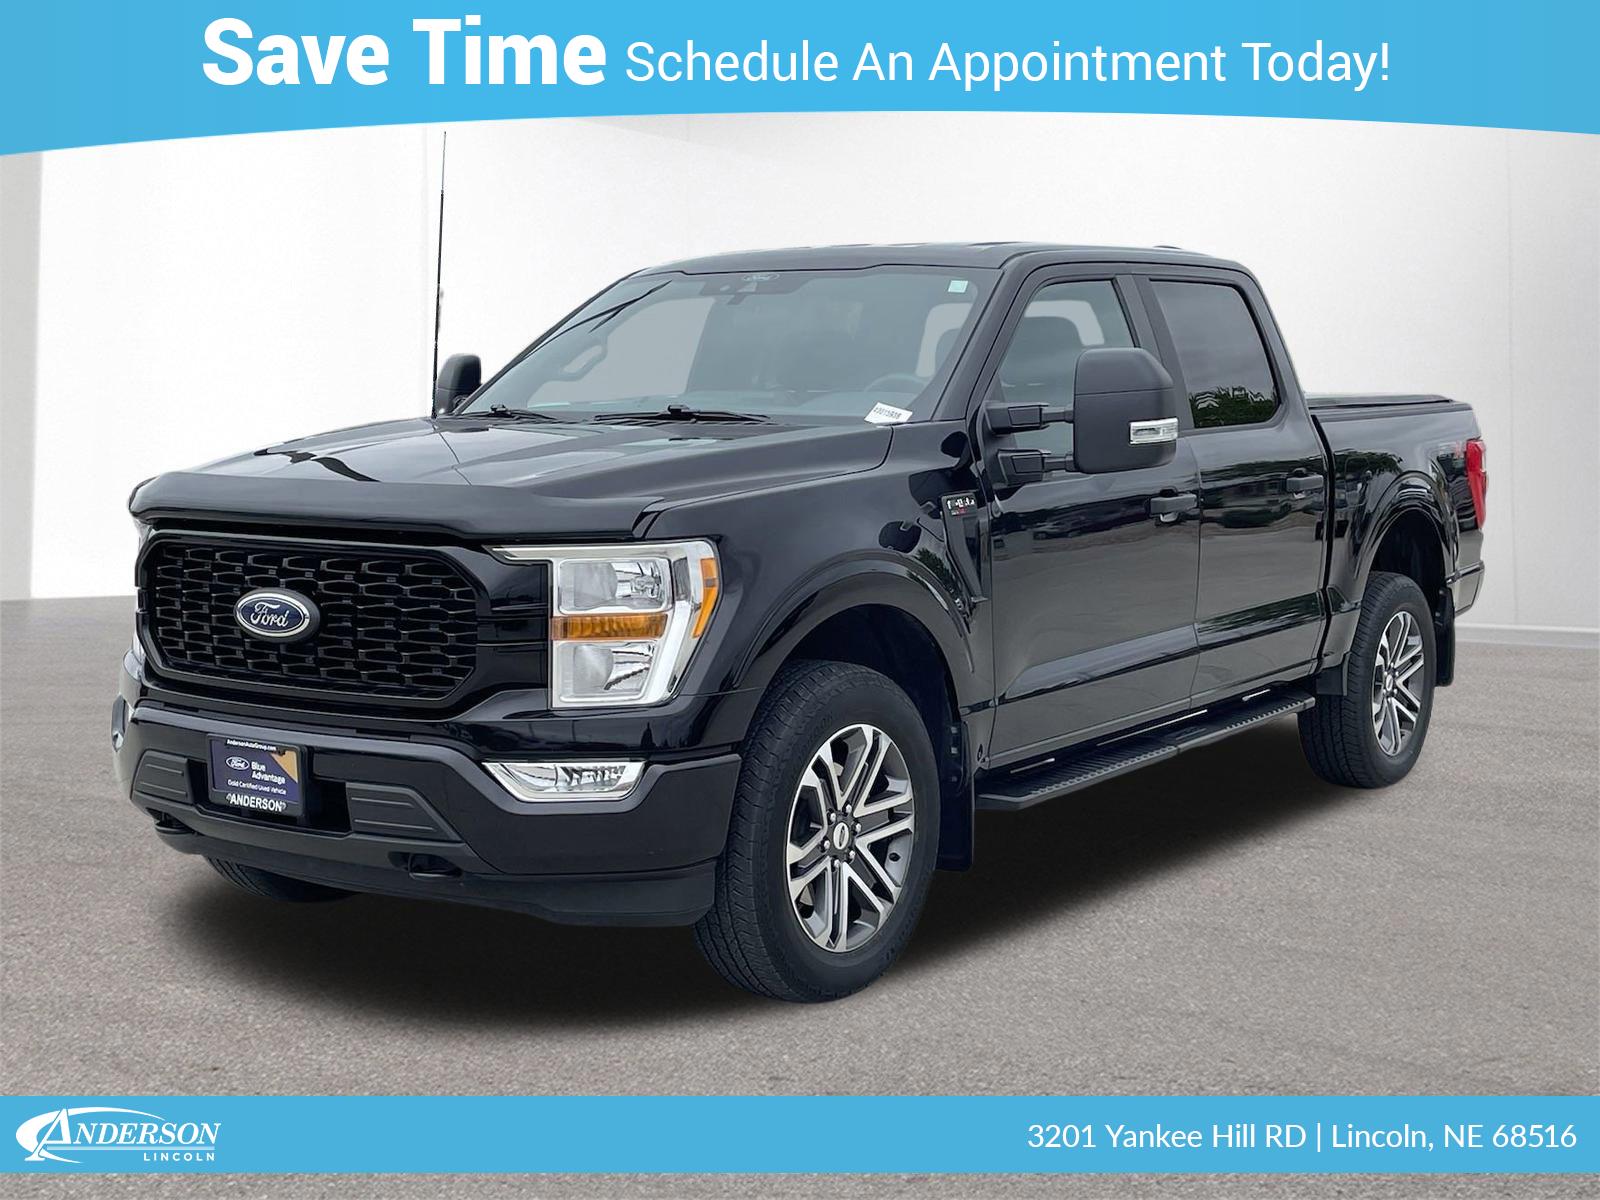 Used 2021 Ford F-150 XL Stock: 4001593B